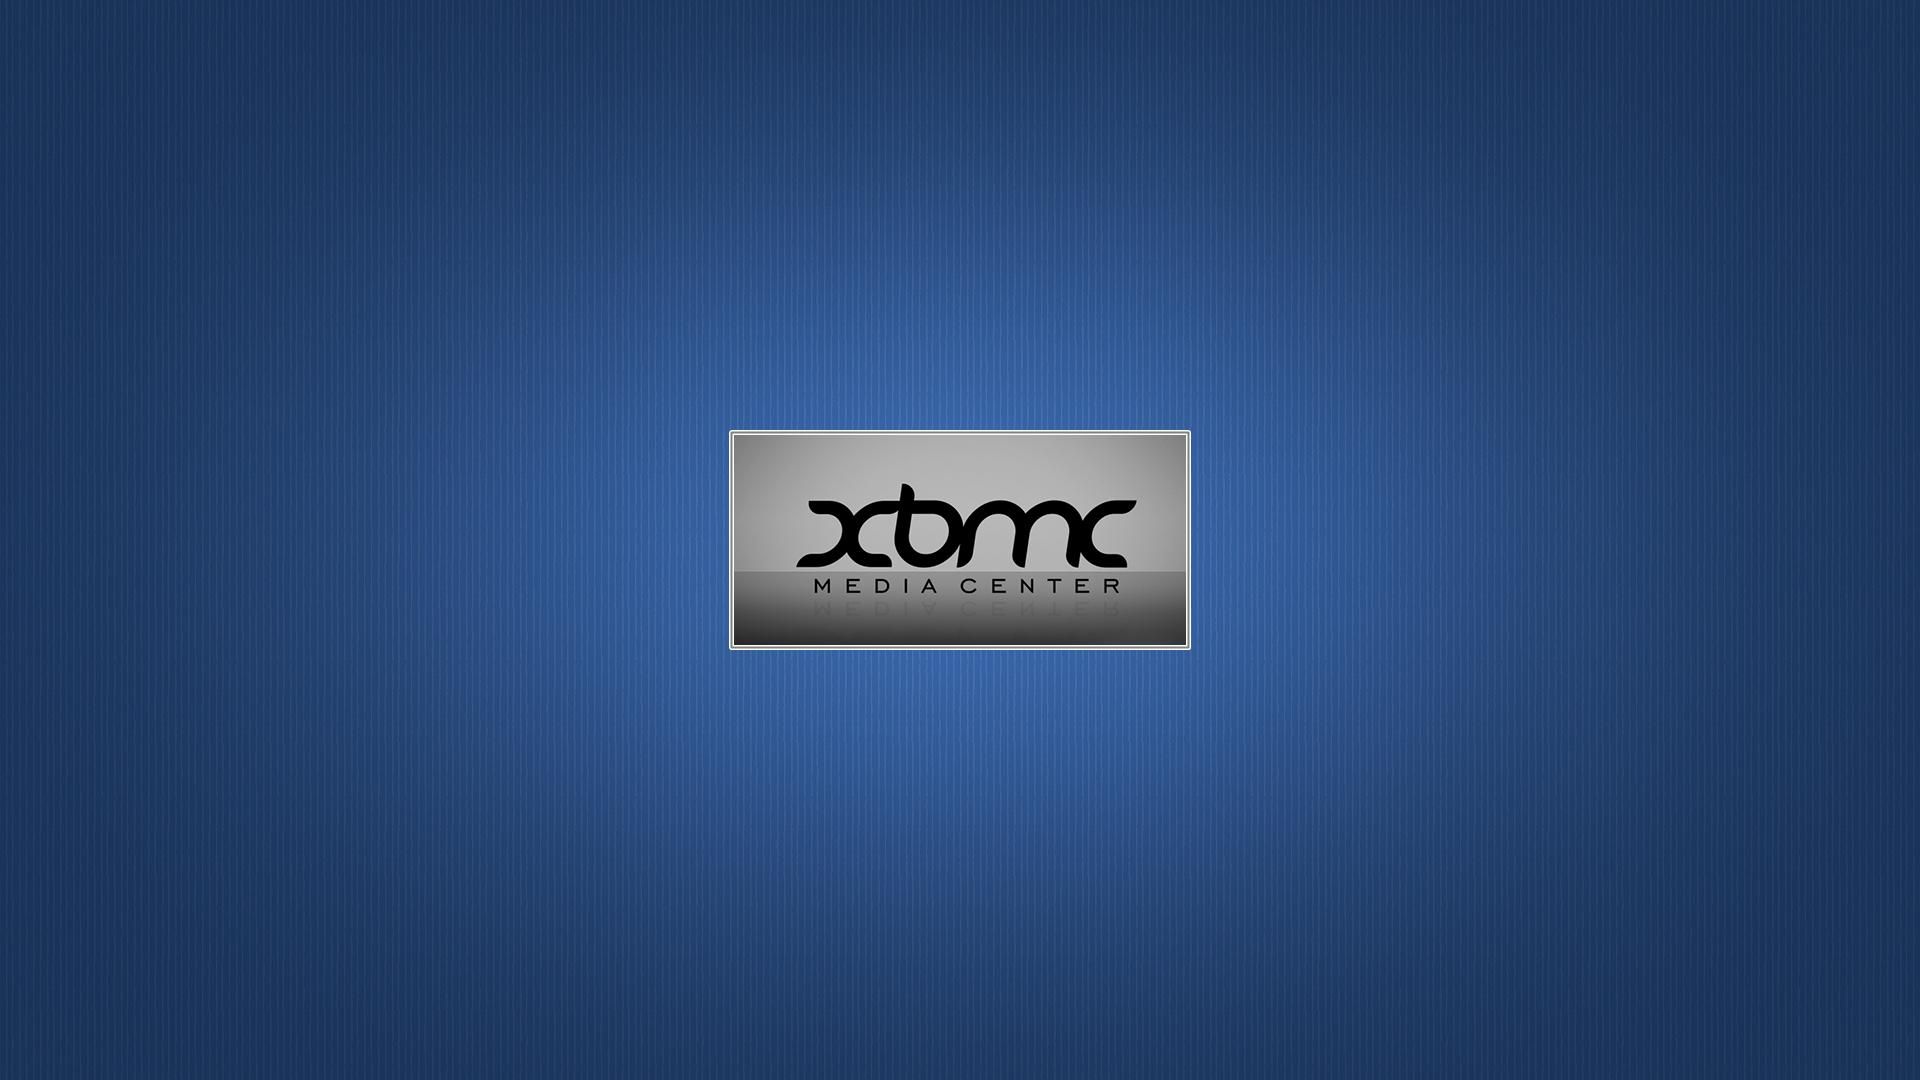 Xbmc - (#133382) - High Quality and Resolution Wallpapers on ...